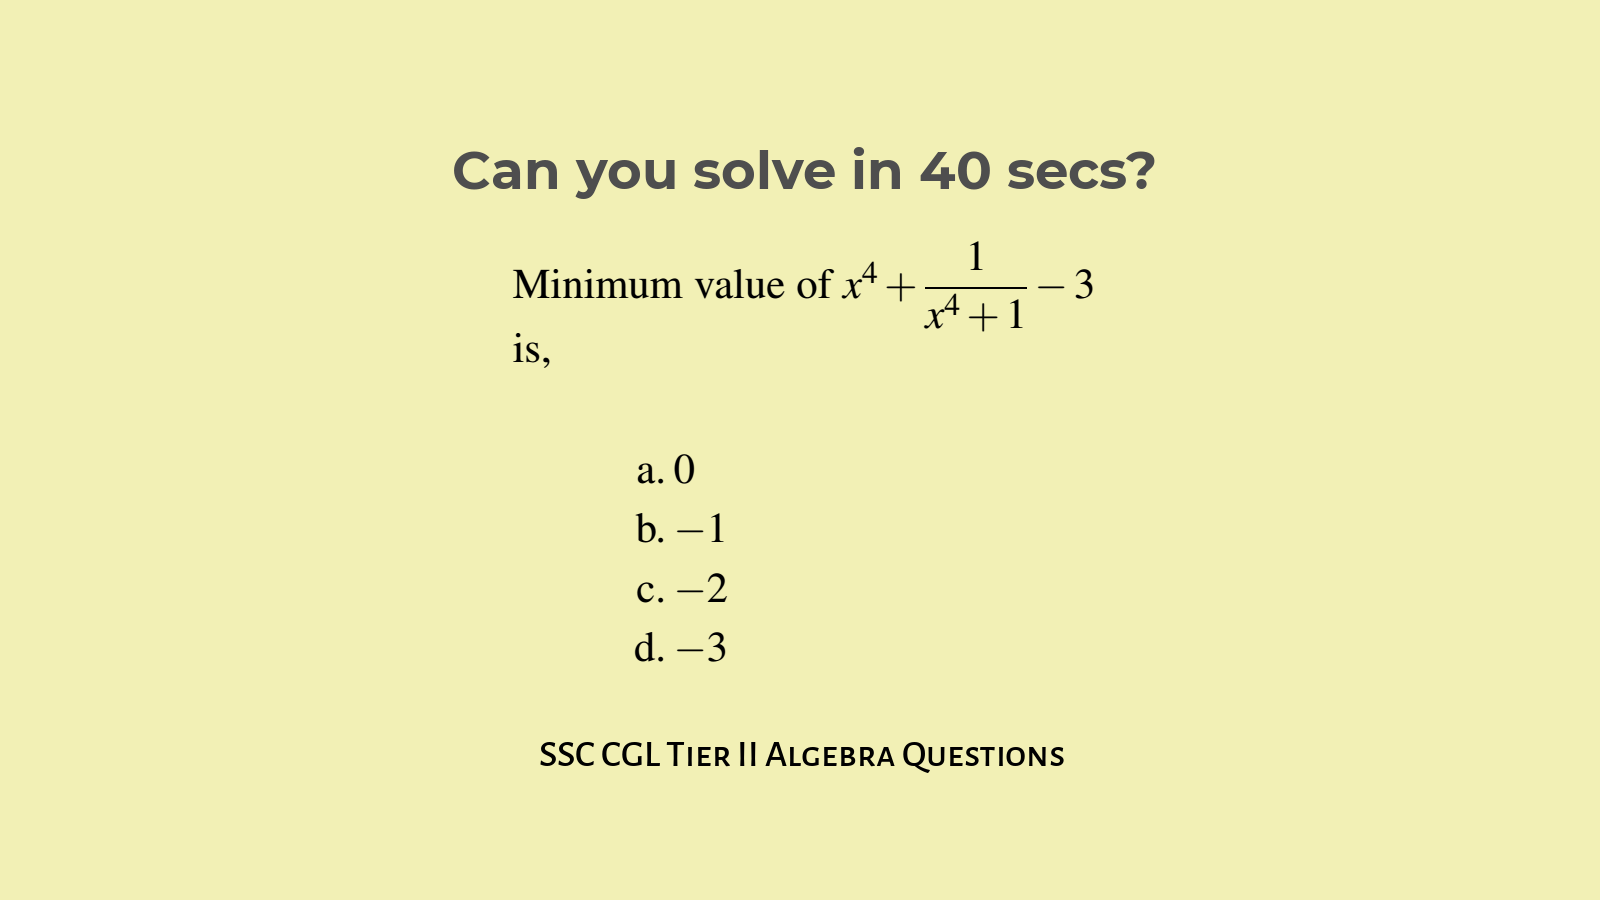 Algebra questions for SSC CGL Tier II with answer Set 3